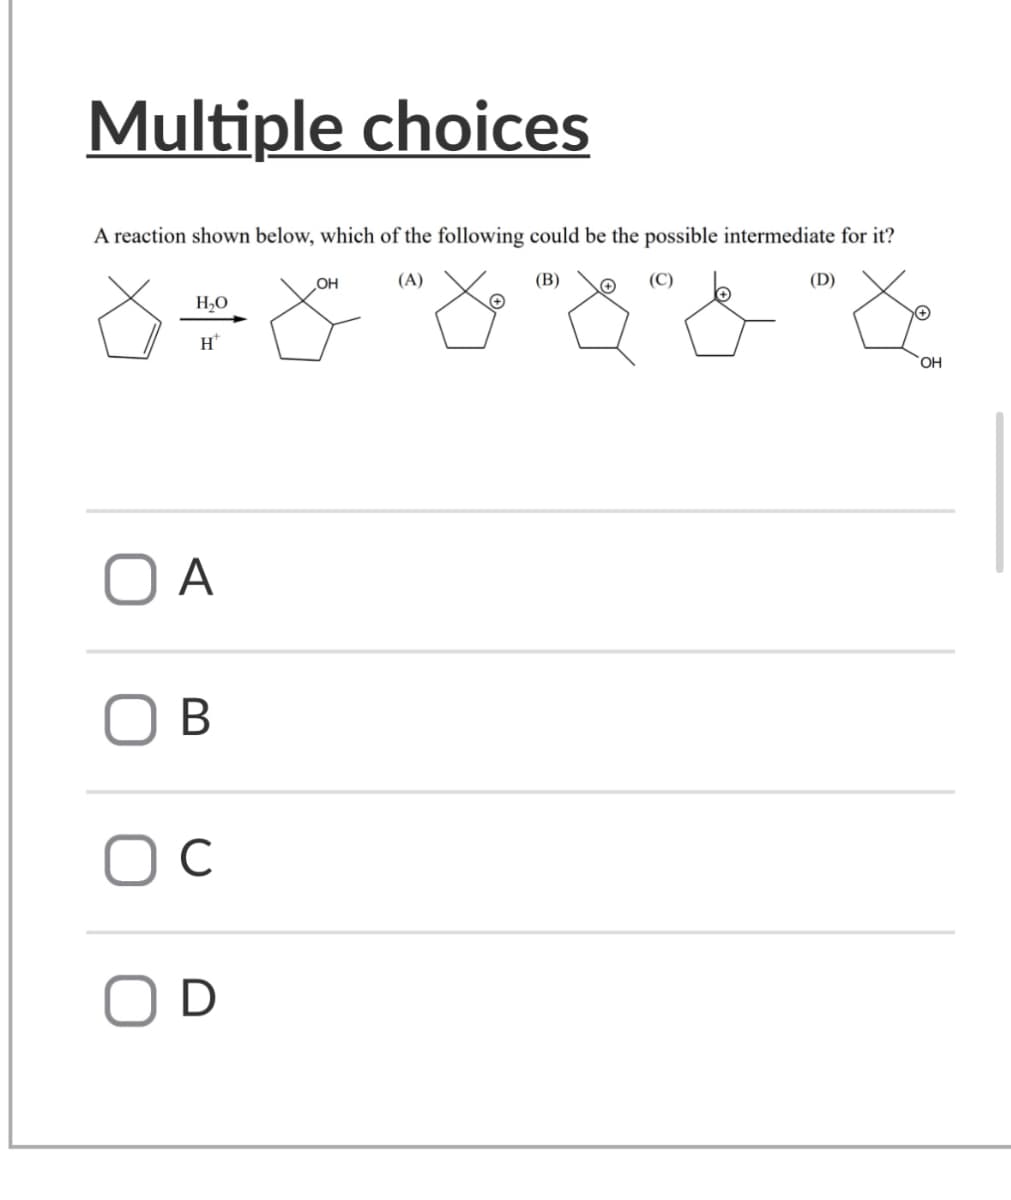 Multiple choices
A reaction shown below, which of the following could be the possible intermediate for it?
OH
(A)
H₂O
H+
ОА
B
C
D
(B)
(D)
OH